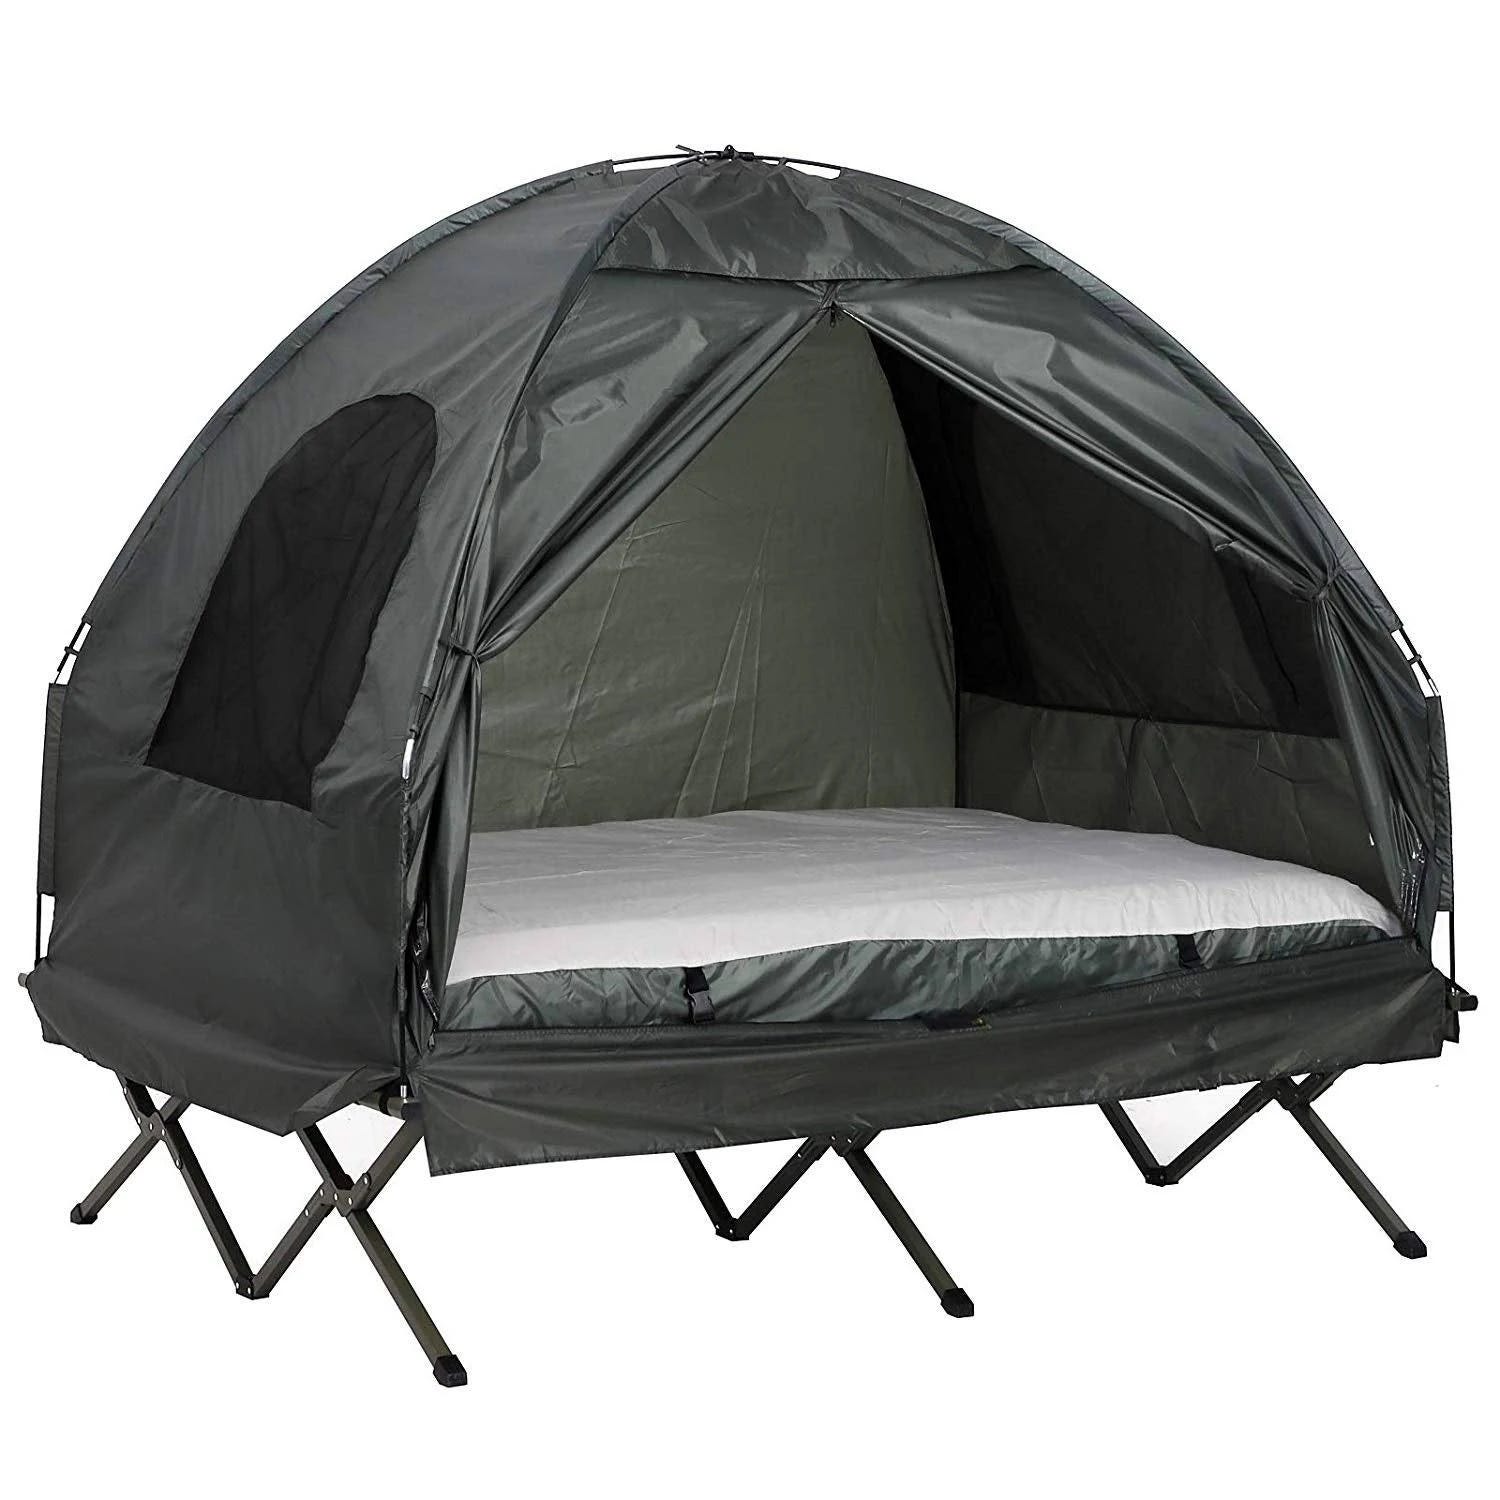 Elevated Camping Cot Tent Combo for Comfortable Outdoor Adventures | Image